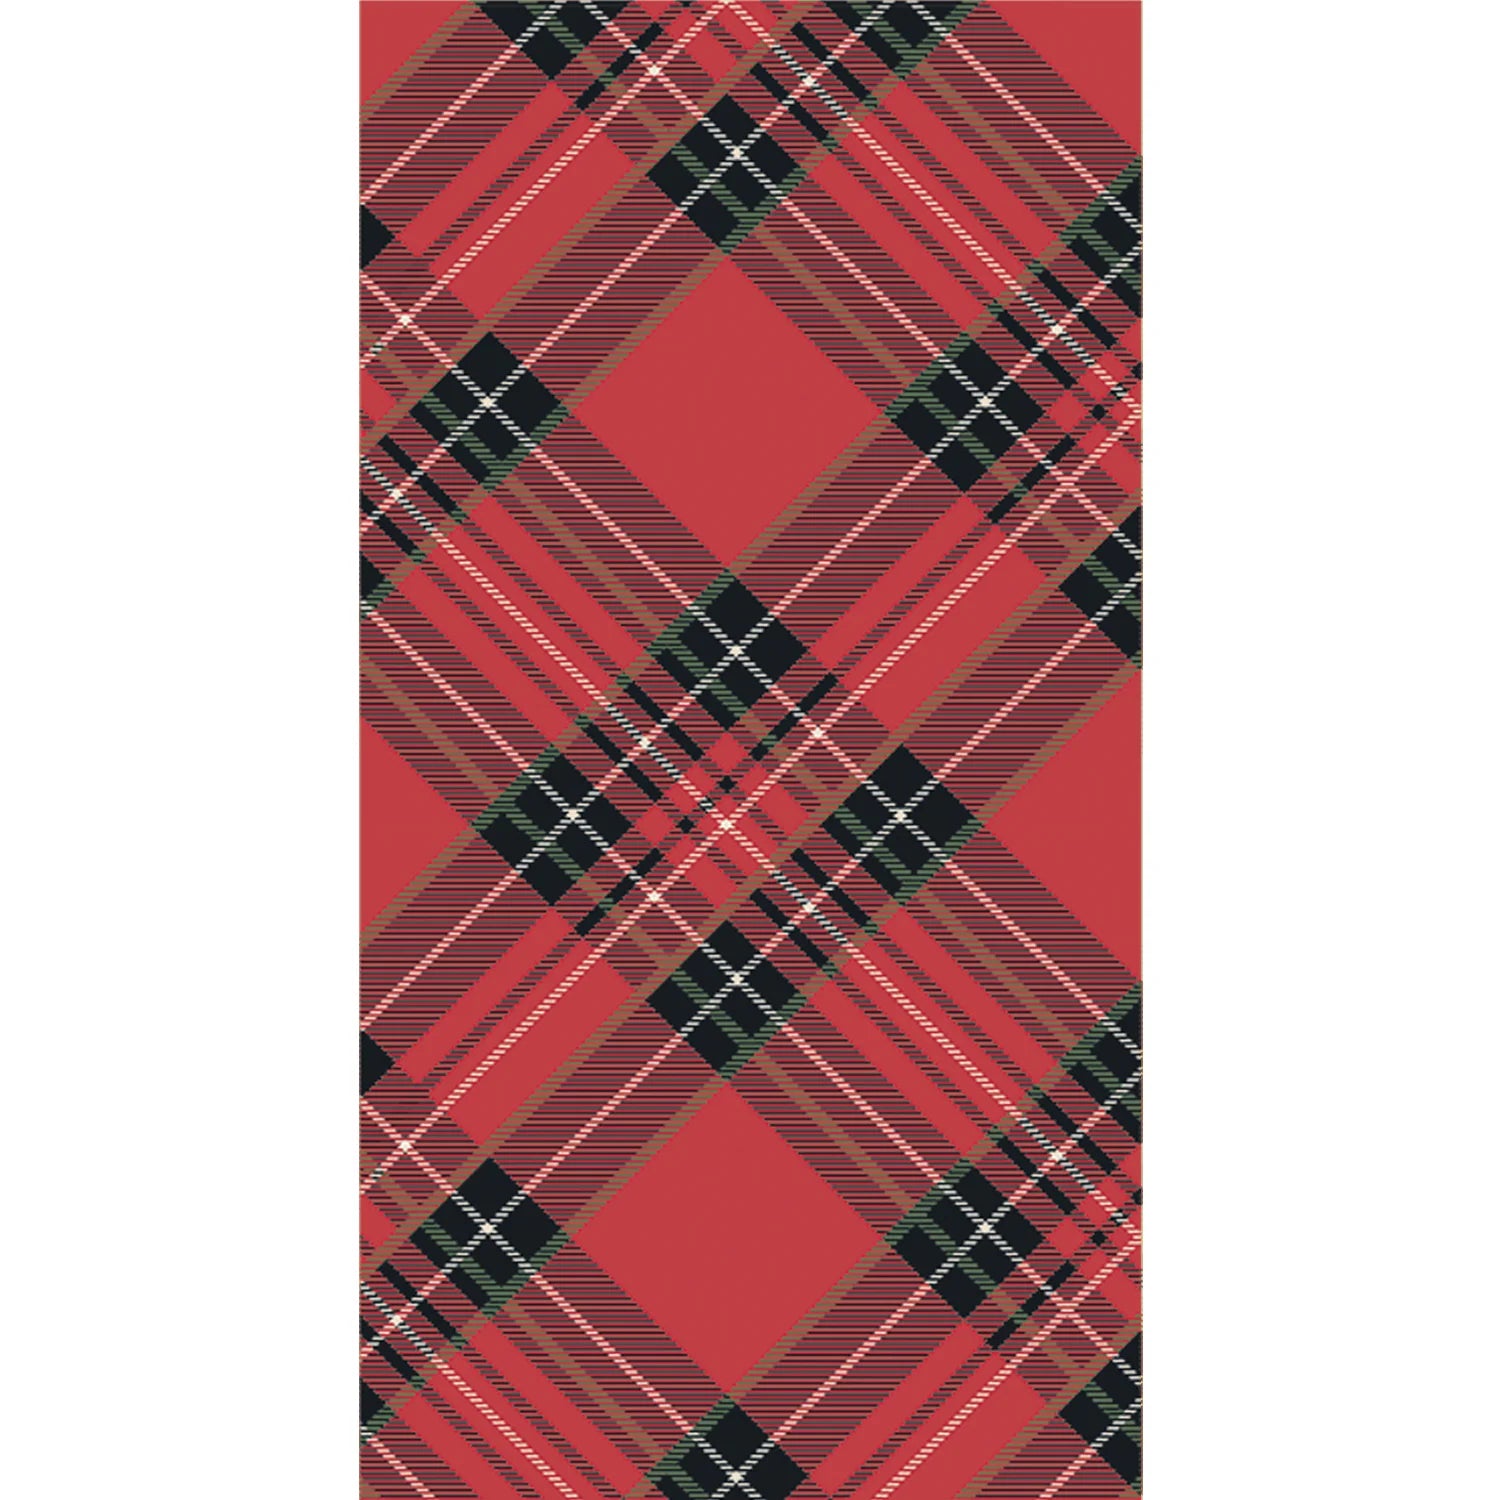 Red Plaid Guest Towels